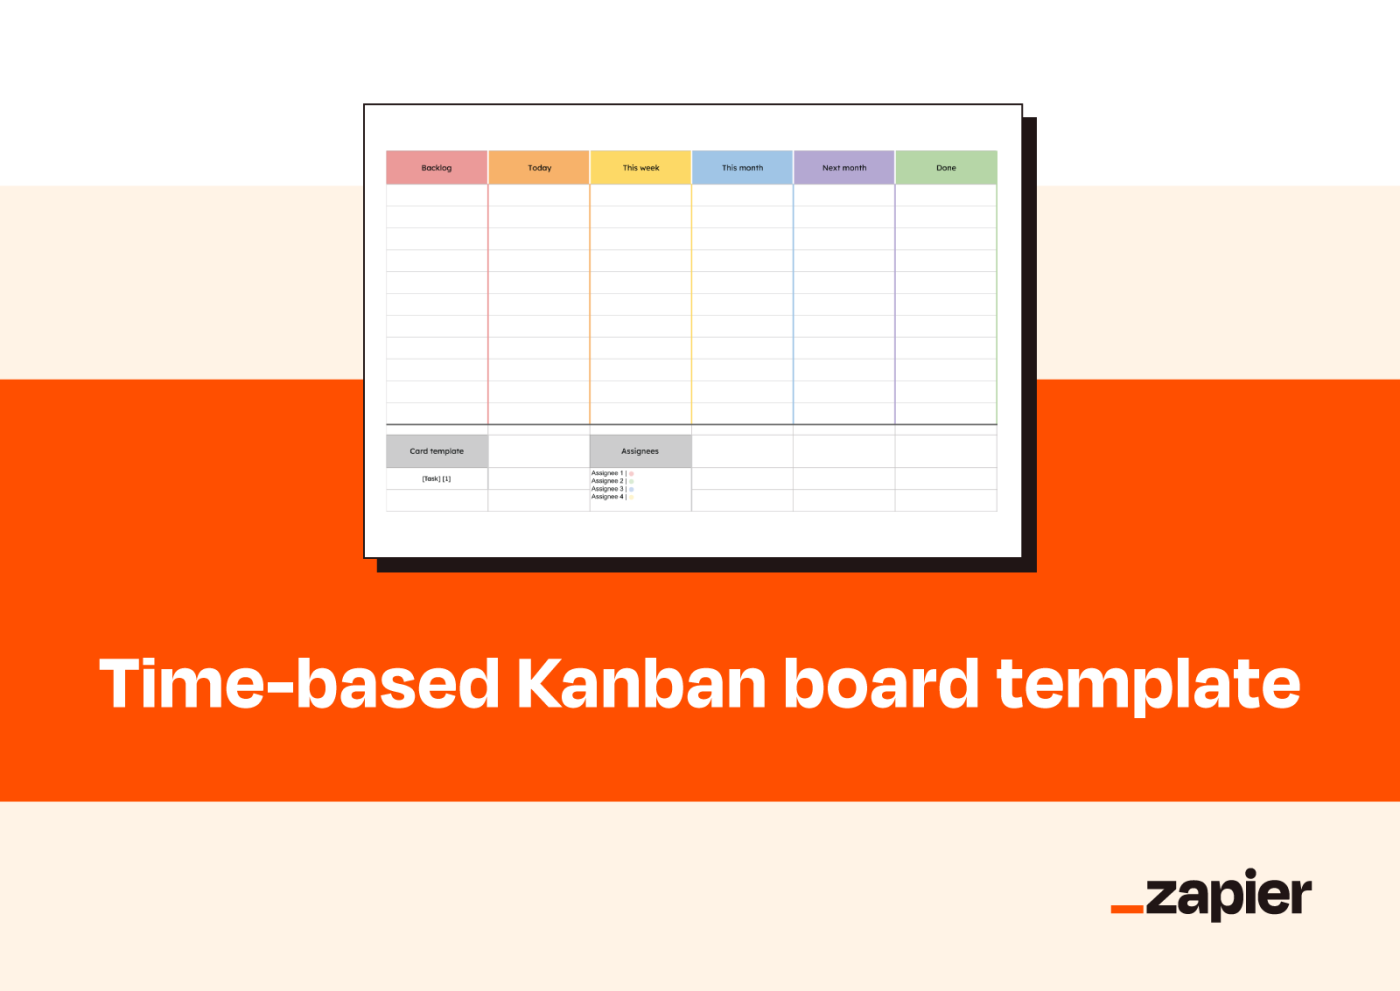 Graphic reading Time-based Kanban board template with screenshot of the template.